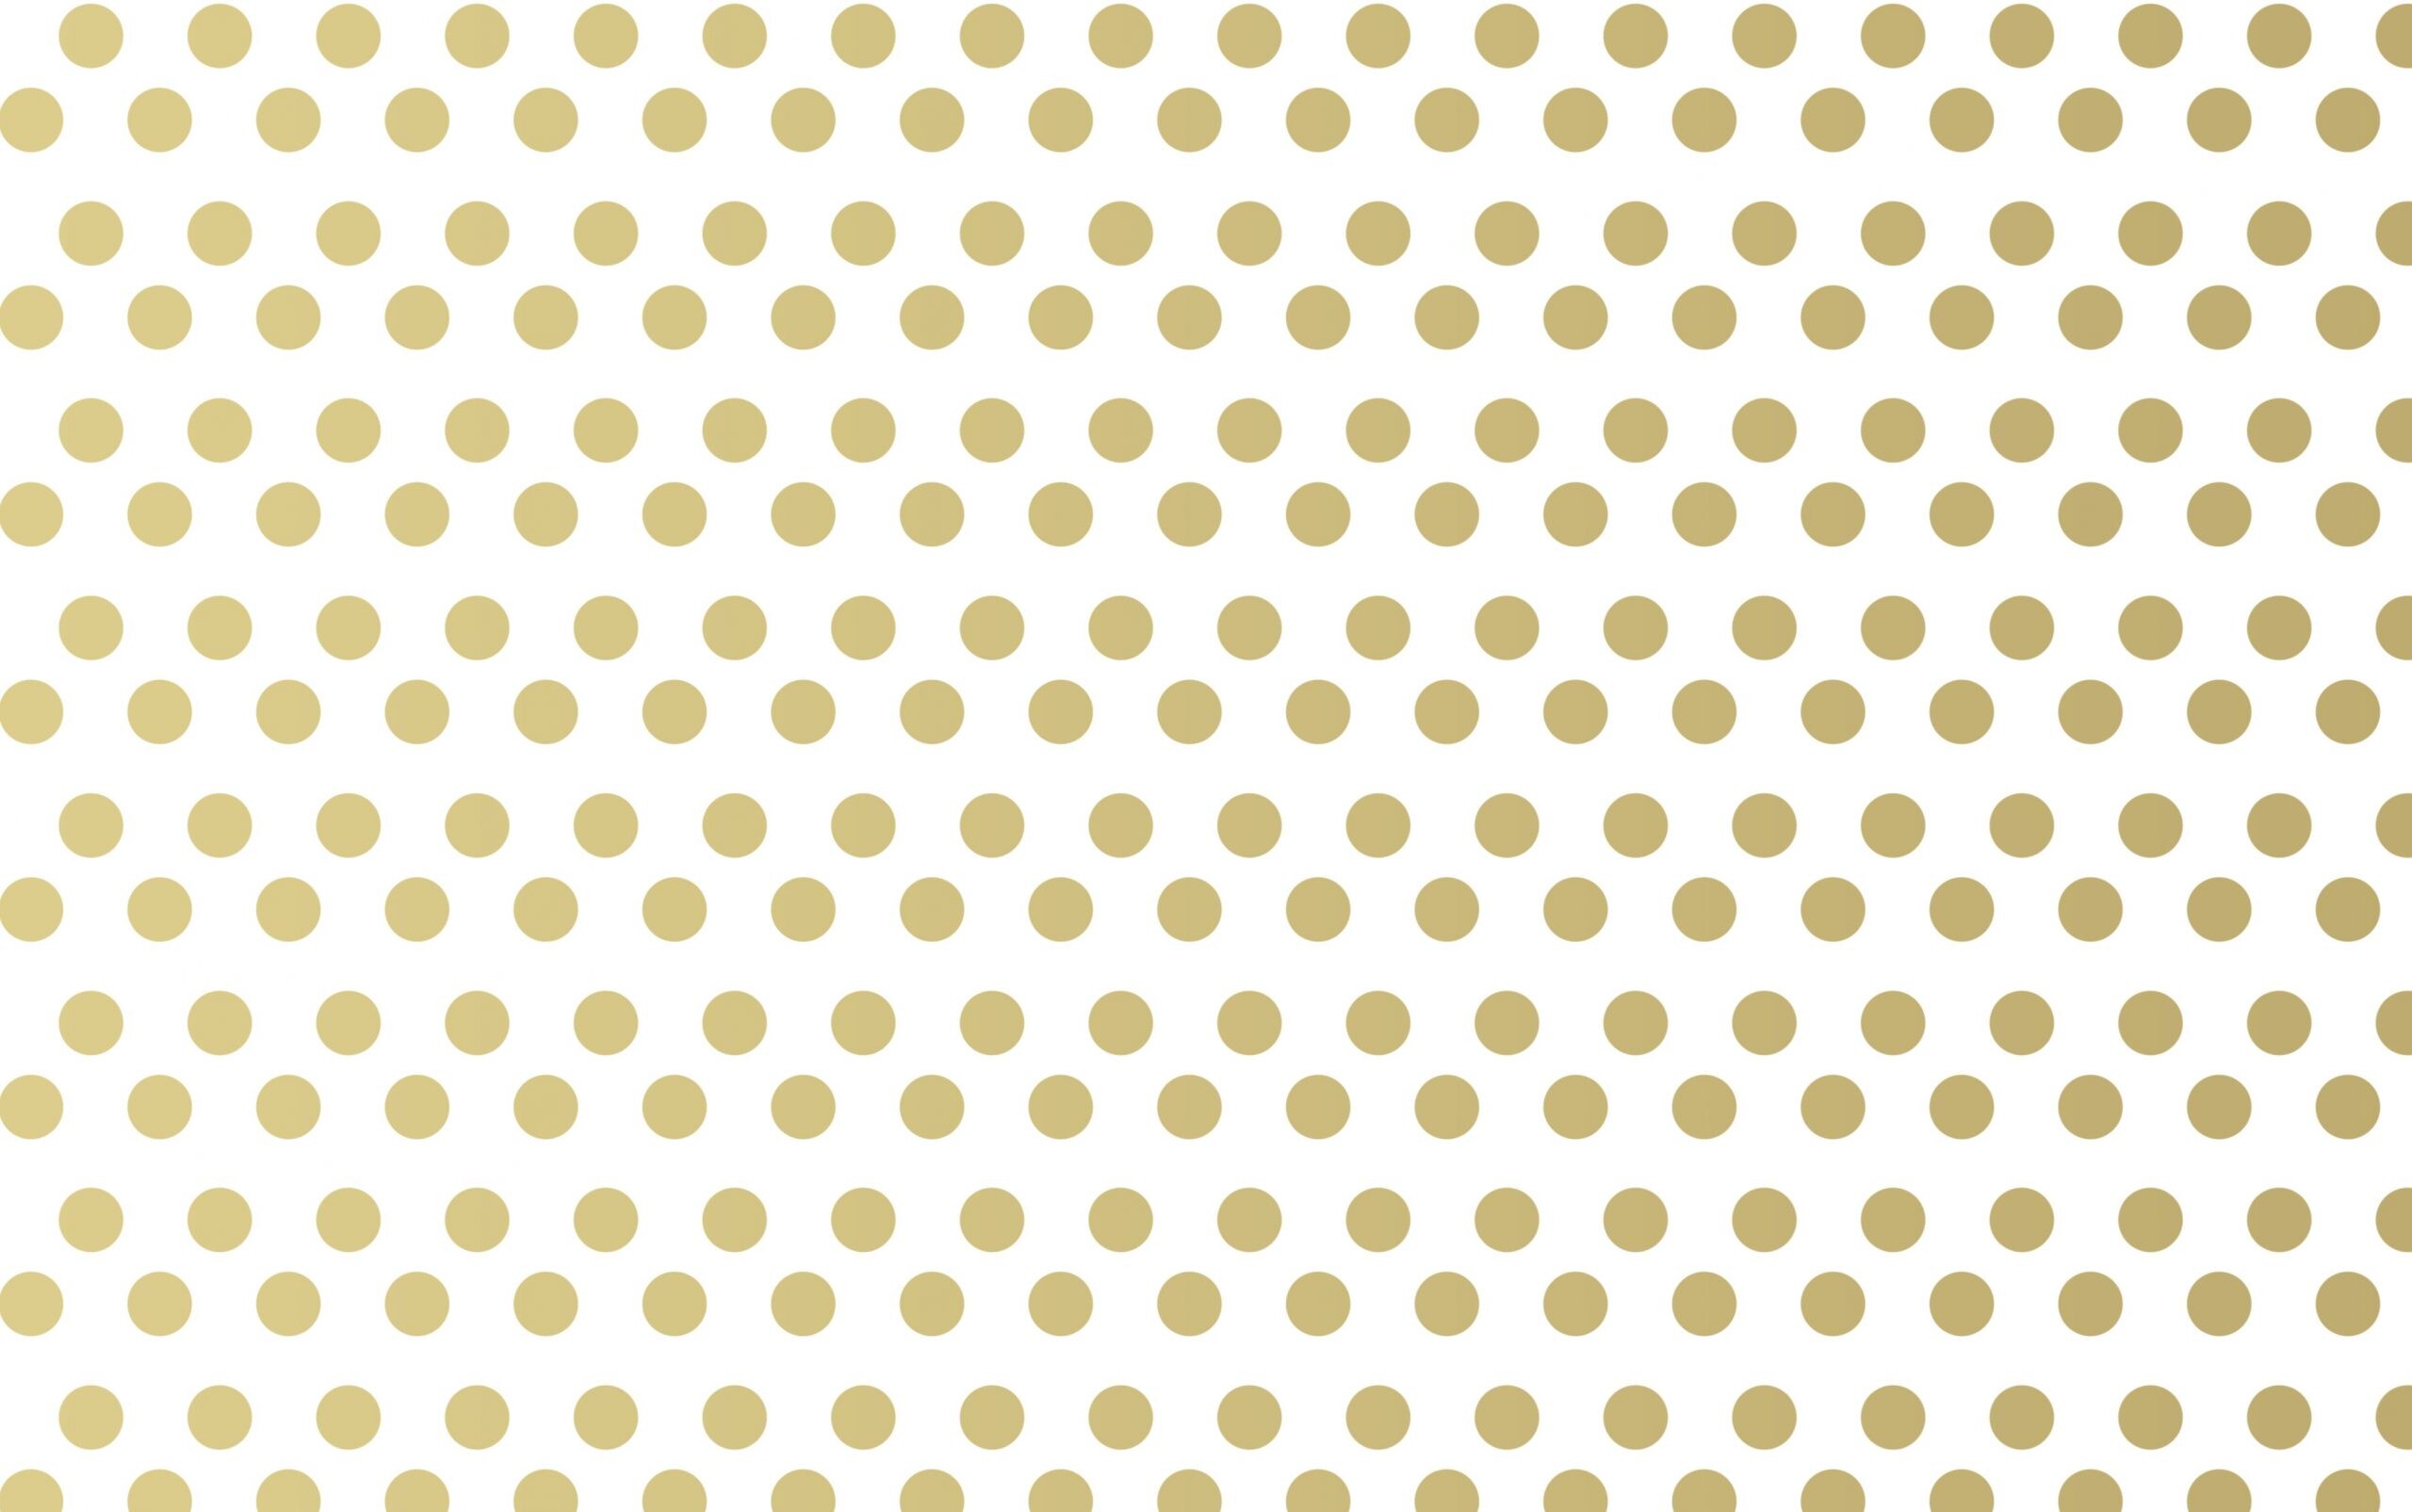 Gold Polka Dot: A pattern made up of numerous circles on a white background, Diagonal repeat layout. 2560x1610 HD Wallpaper.